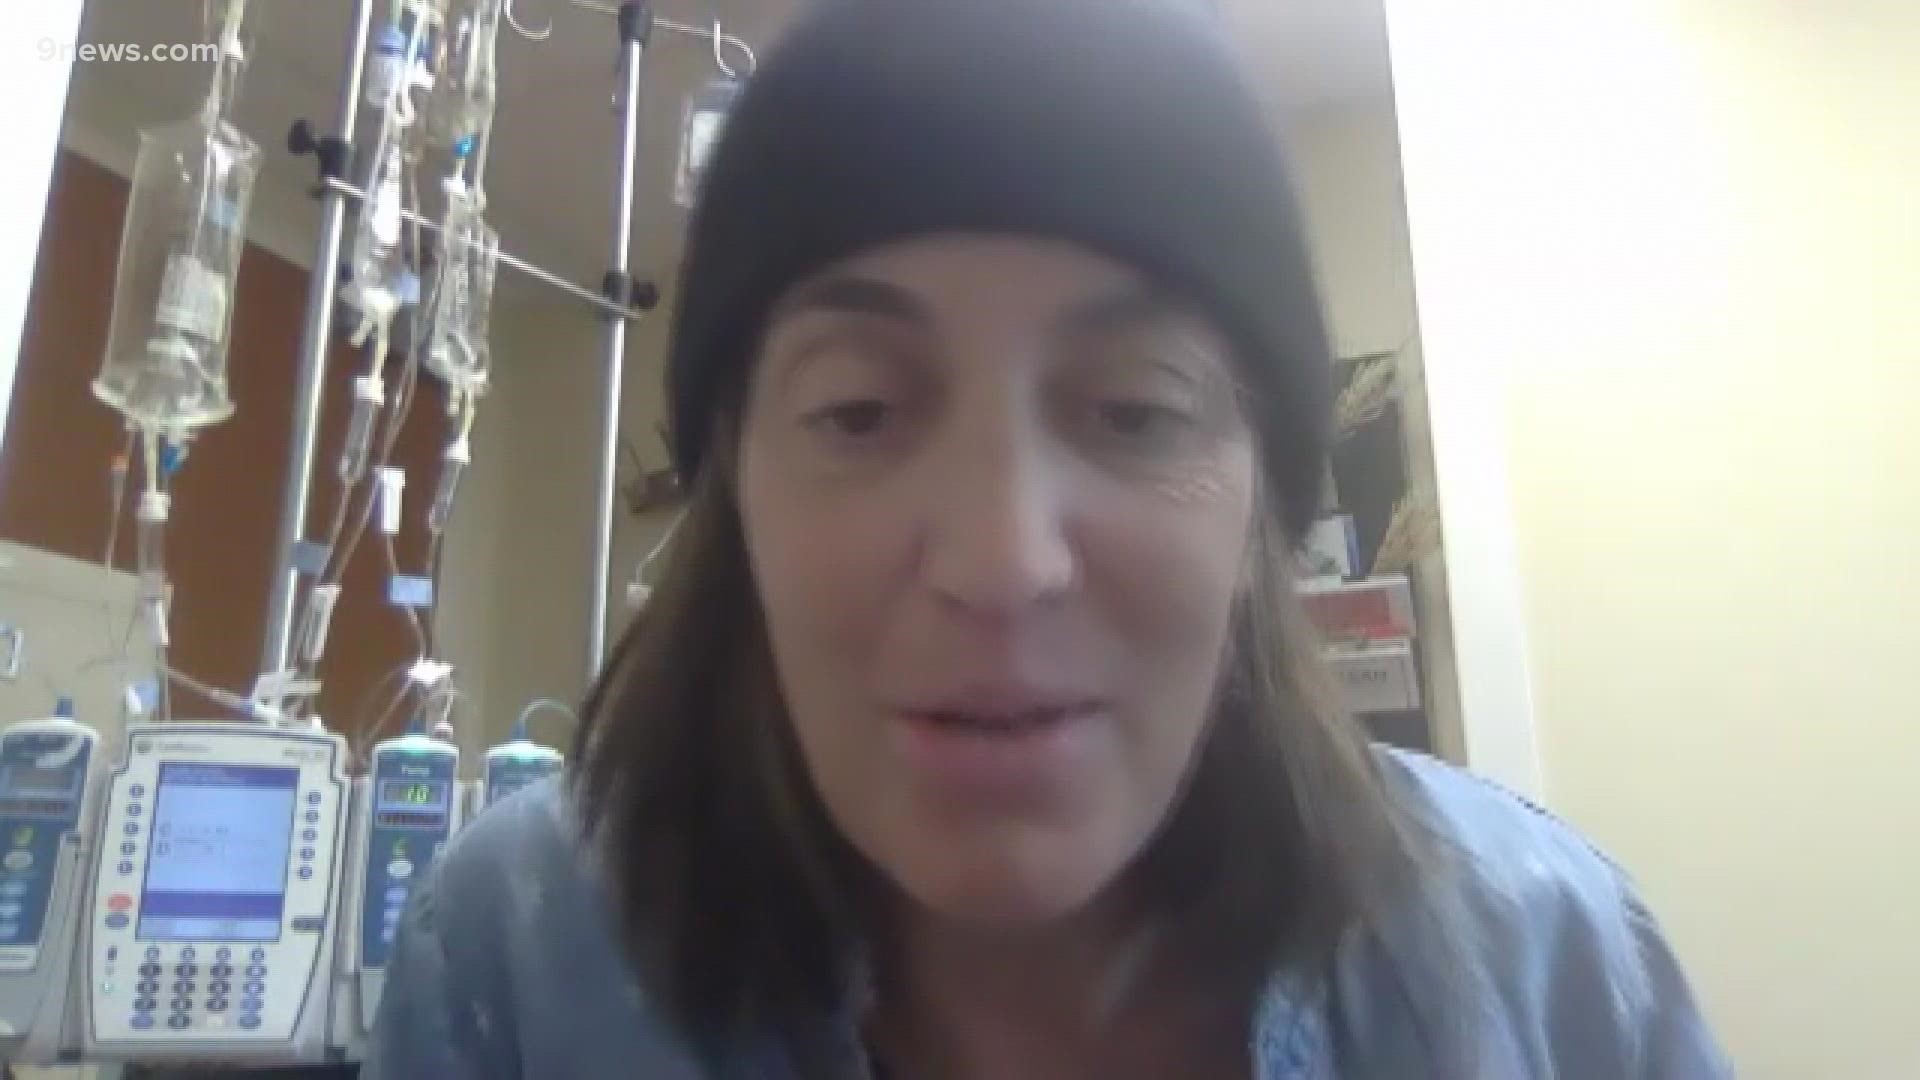 Kim Bierbrauer, in Colorado, was diagnosed with leukemia in May and has been in the hospital since. As she spends Thanksgiving there, she has a message for others.